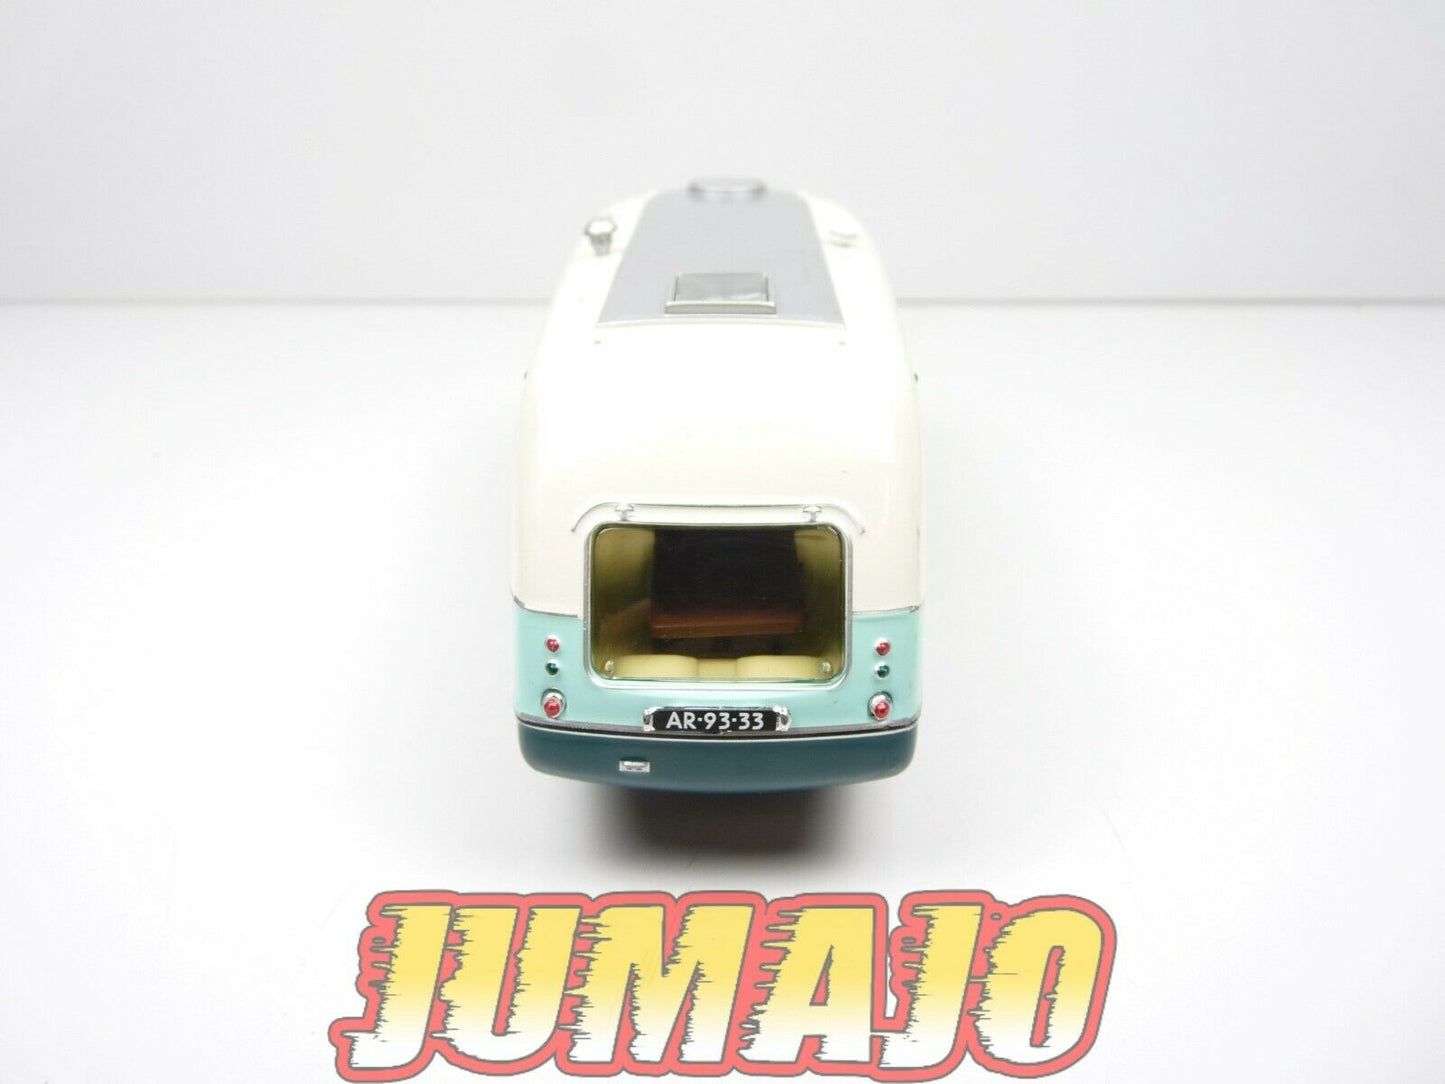 CCE203  1/43 camping cars hachettes : Citroën type H coccinelle III Le Bastard 1954